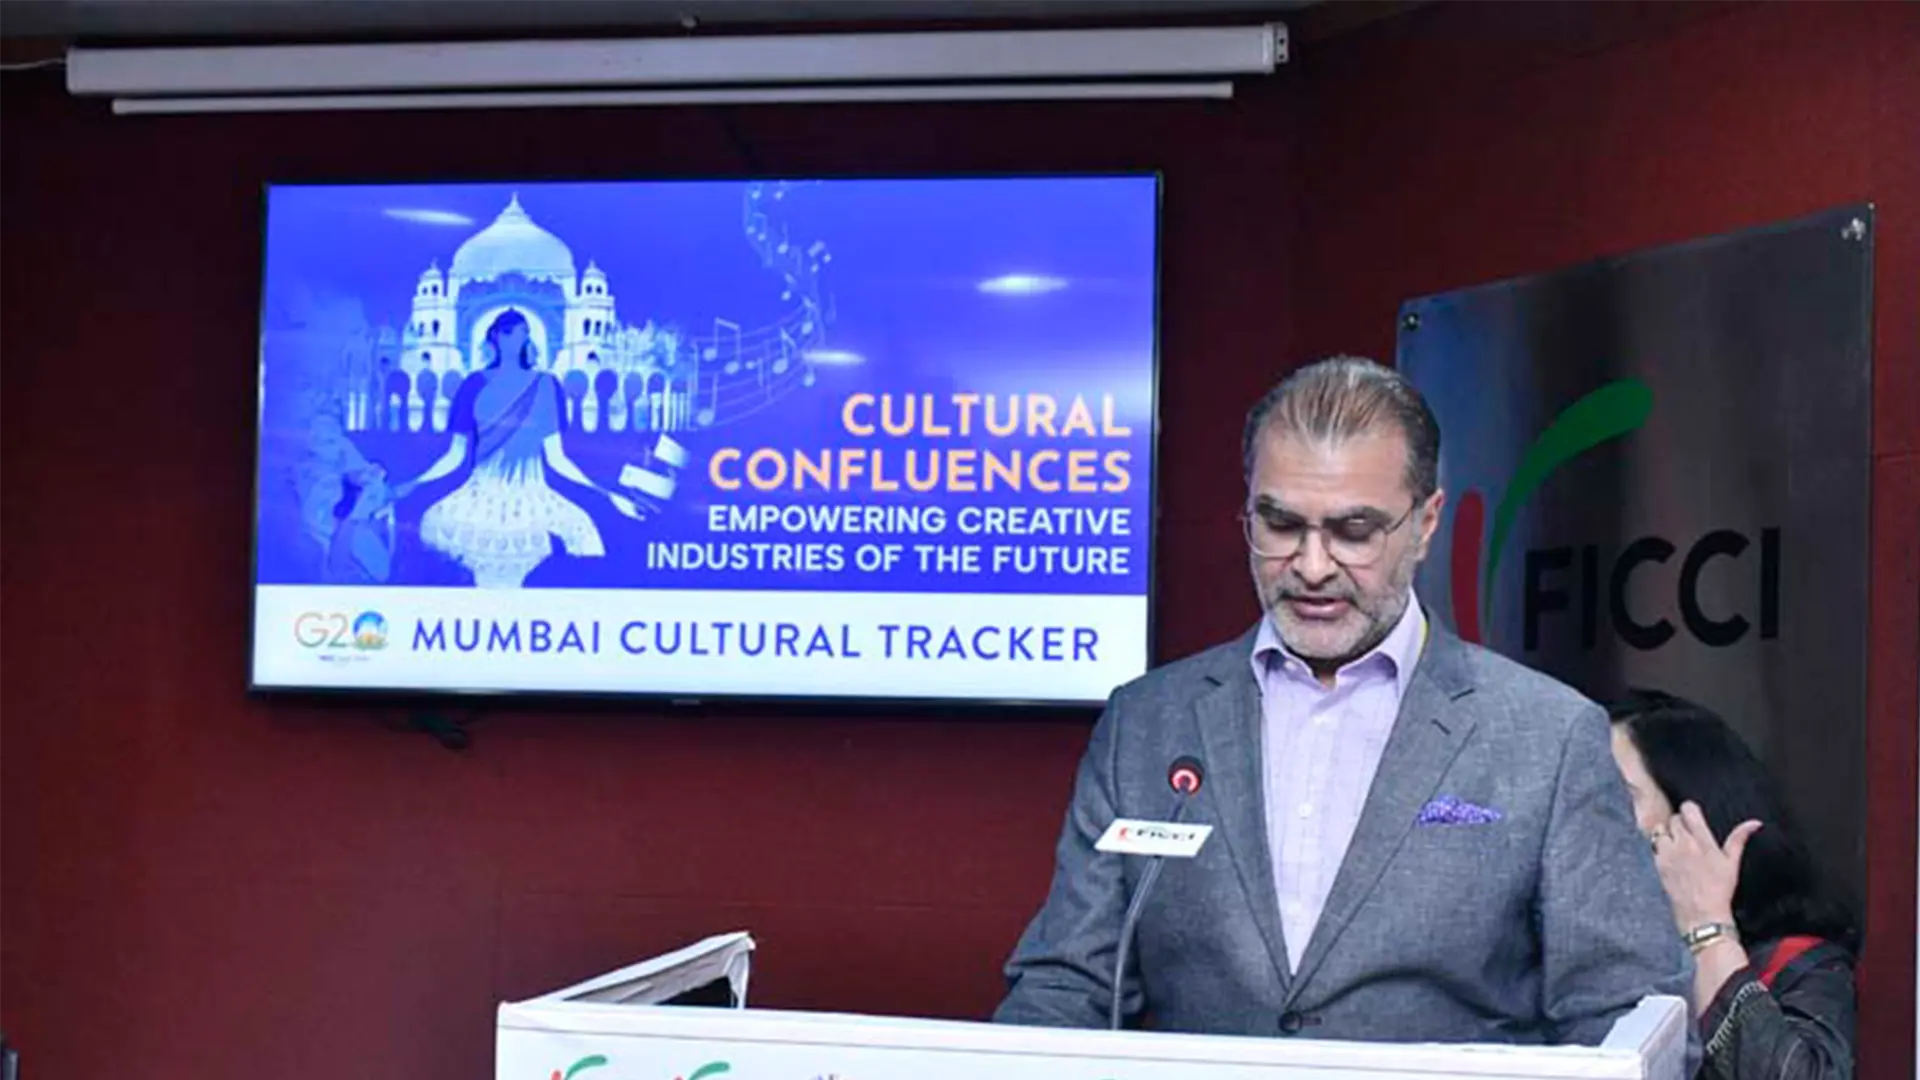 In celebration of India’s G20 Presidency, FICCI  in association with Avid Learning  presented ‘Virasat – Mapping Creativity’